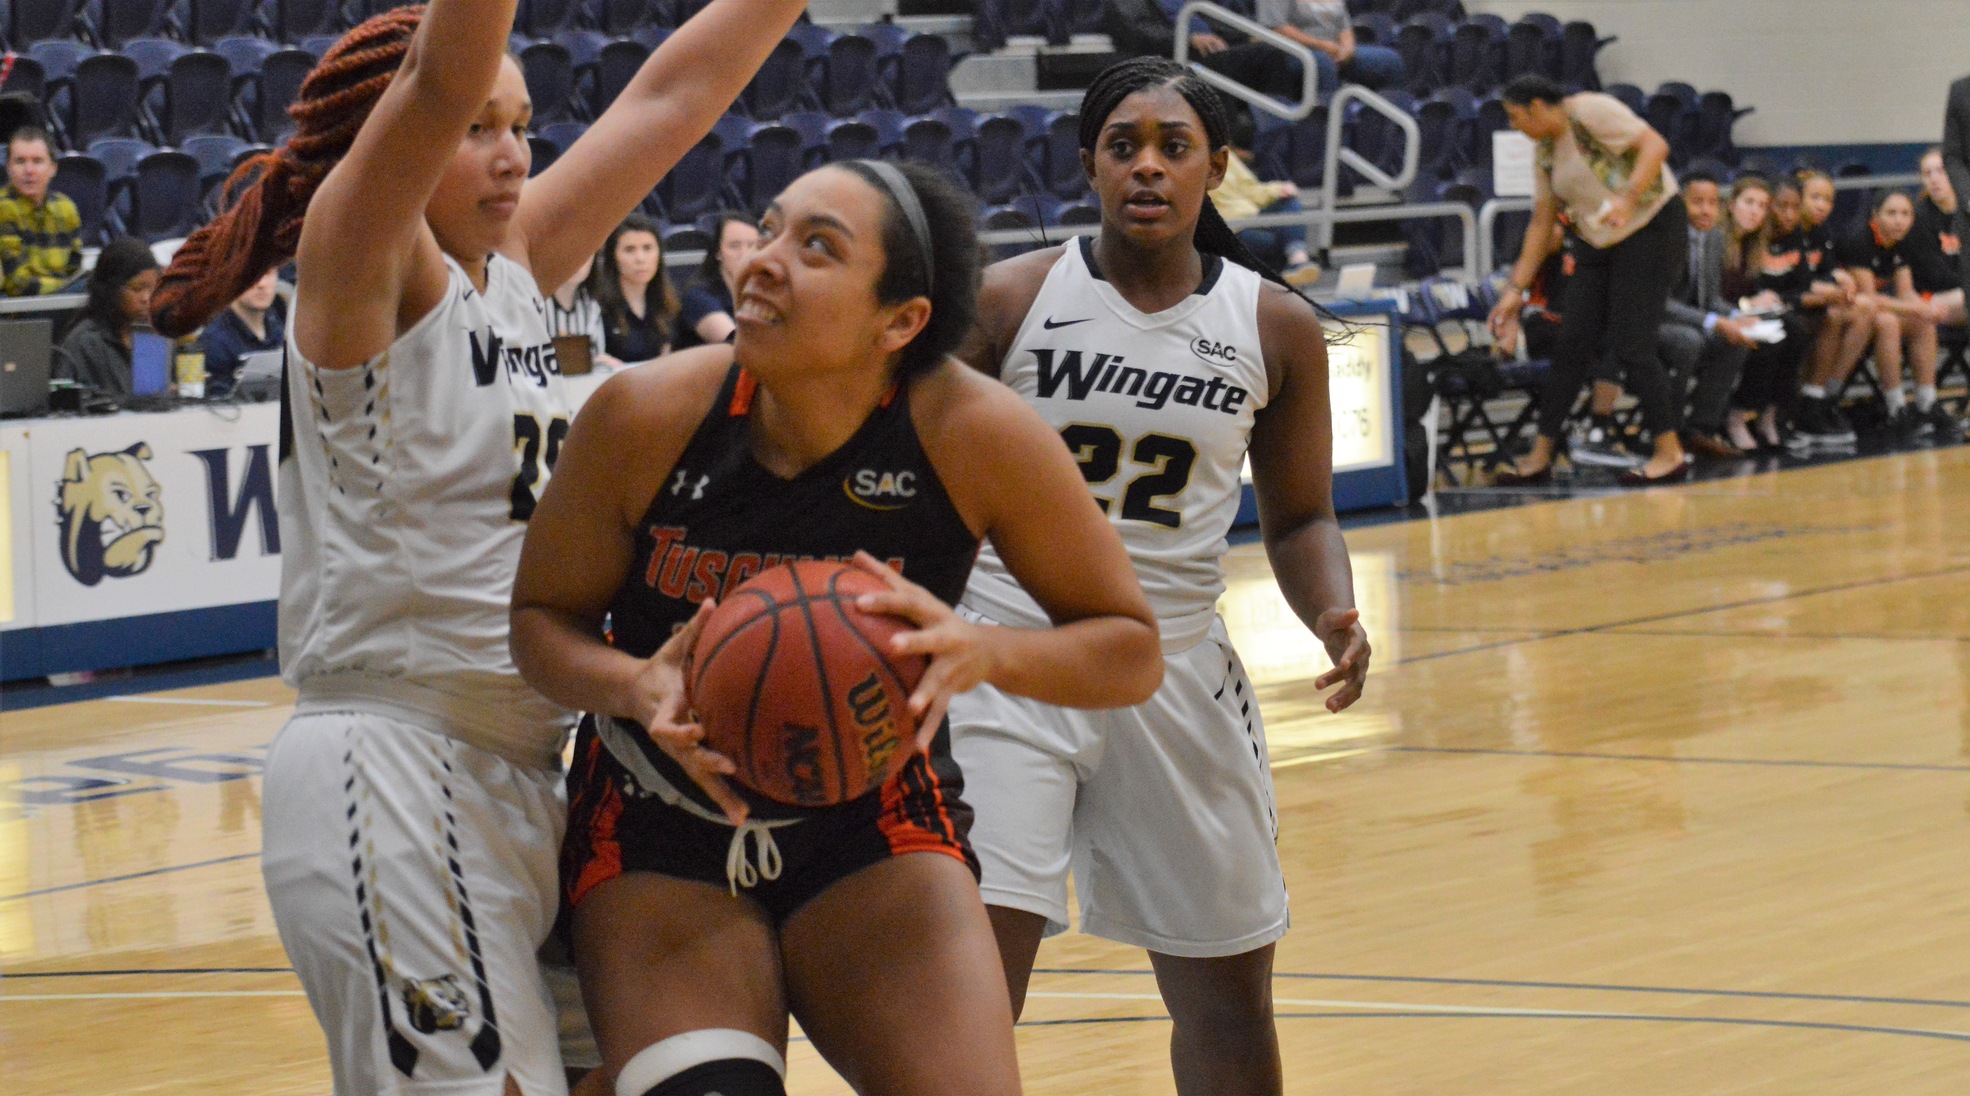 Fourth-quarter Pioneer rally falls short in 73-67 loss at Wingate